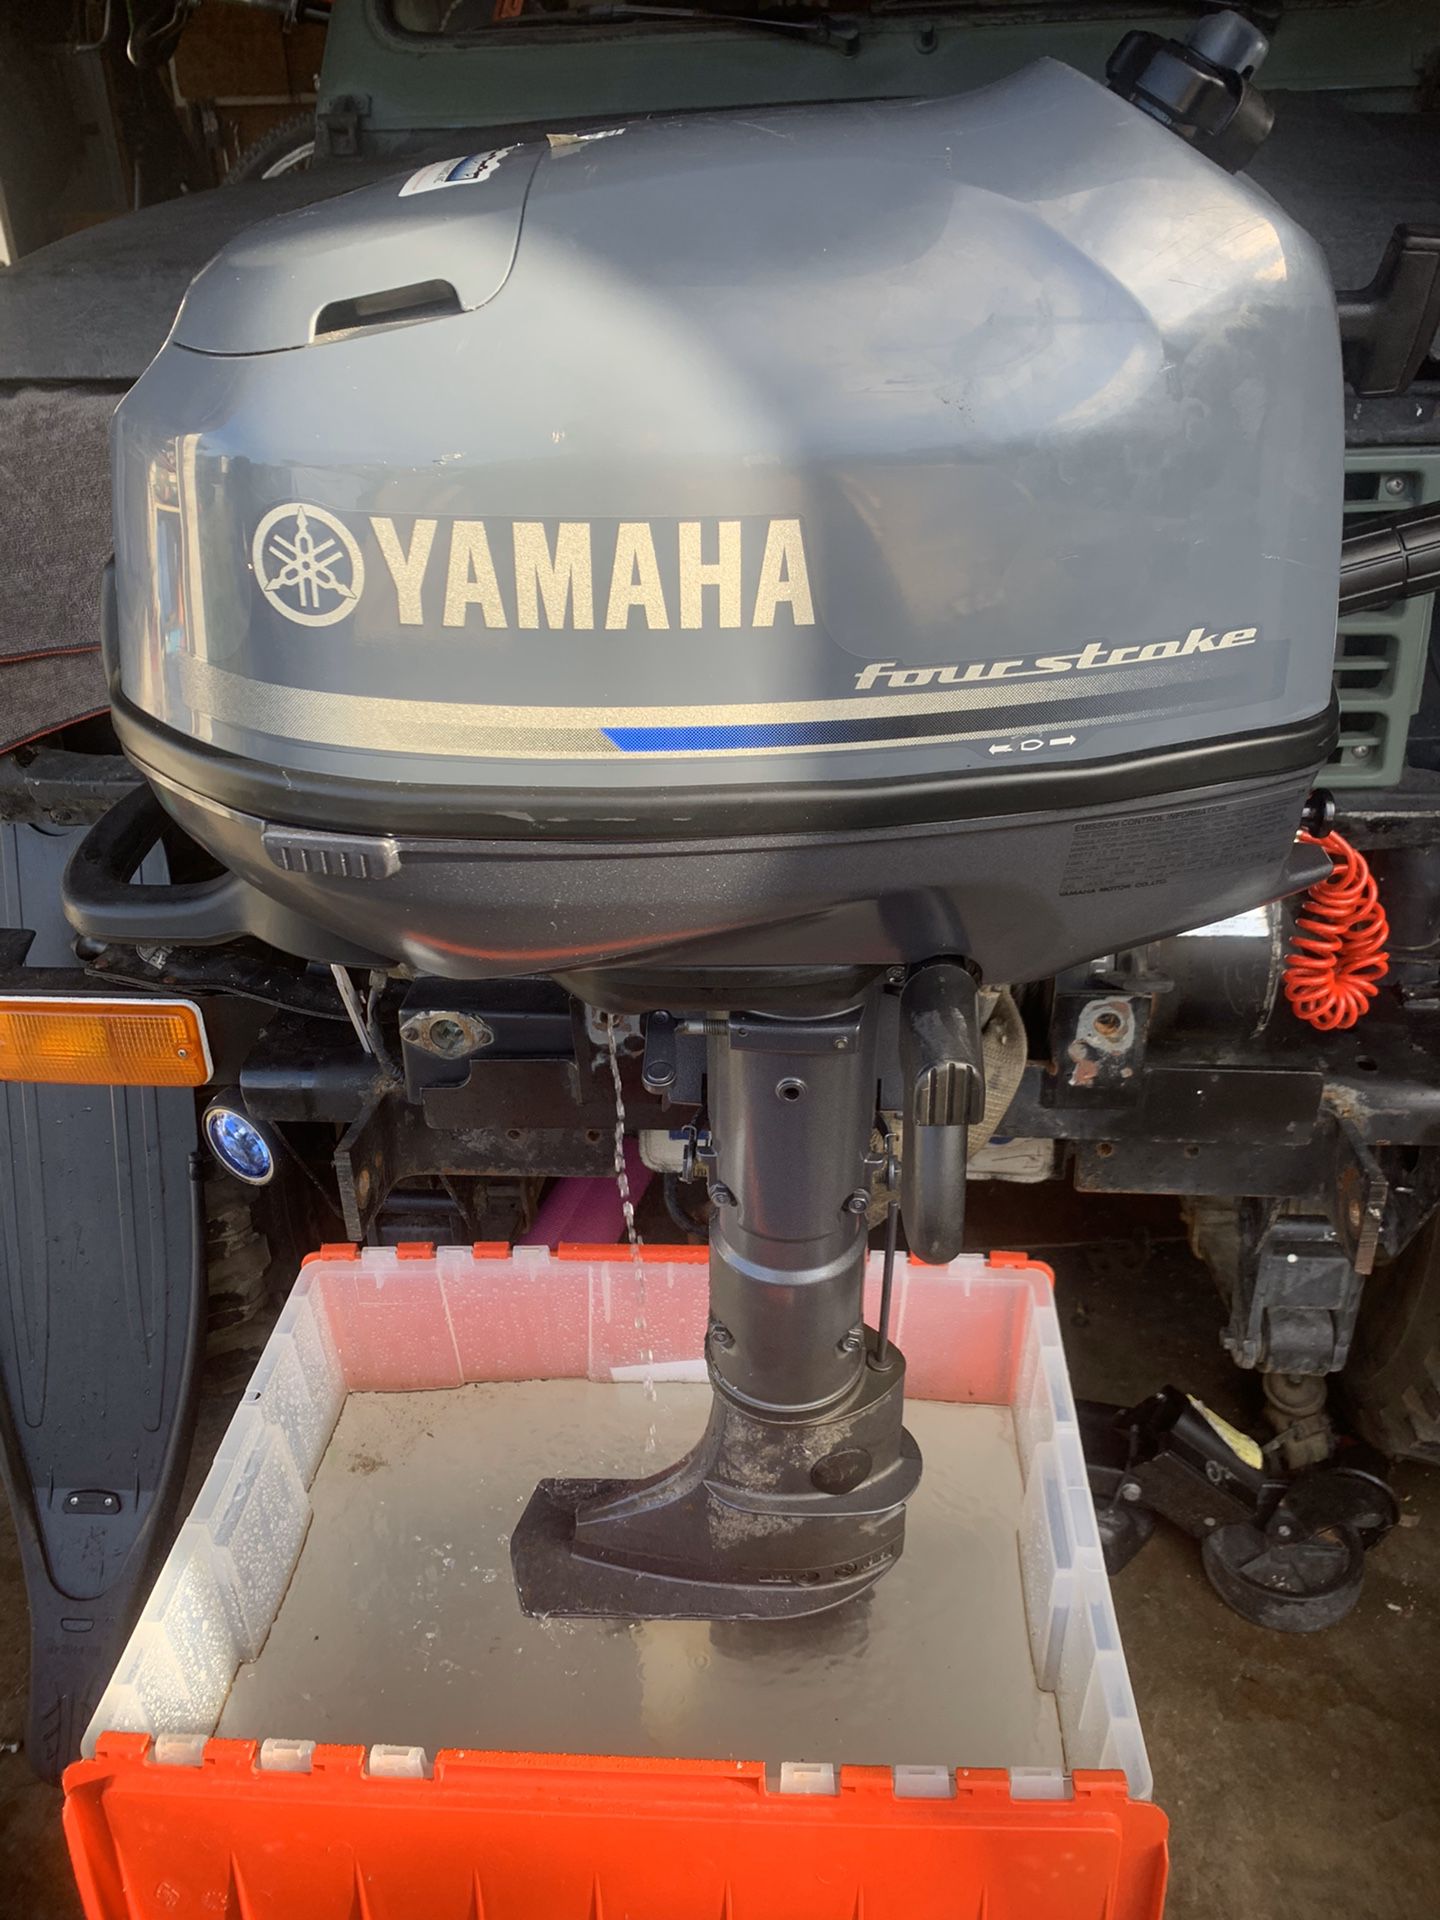 4hp four stroke outboard